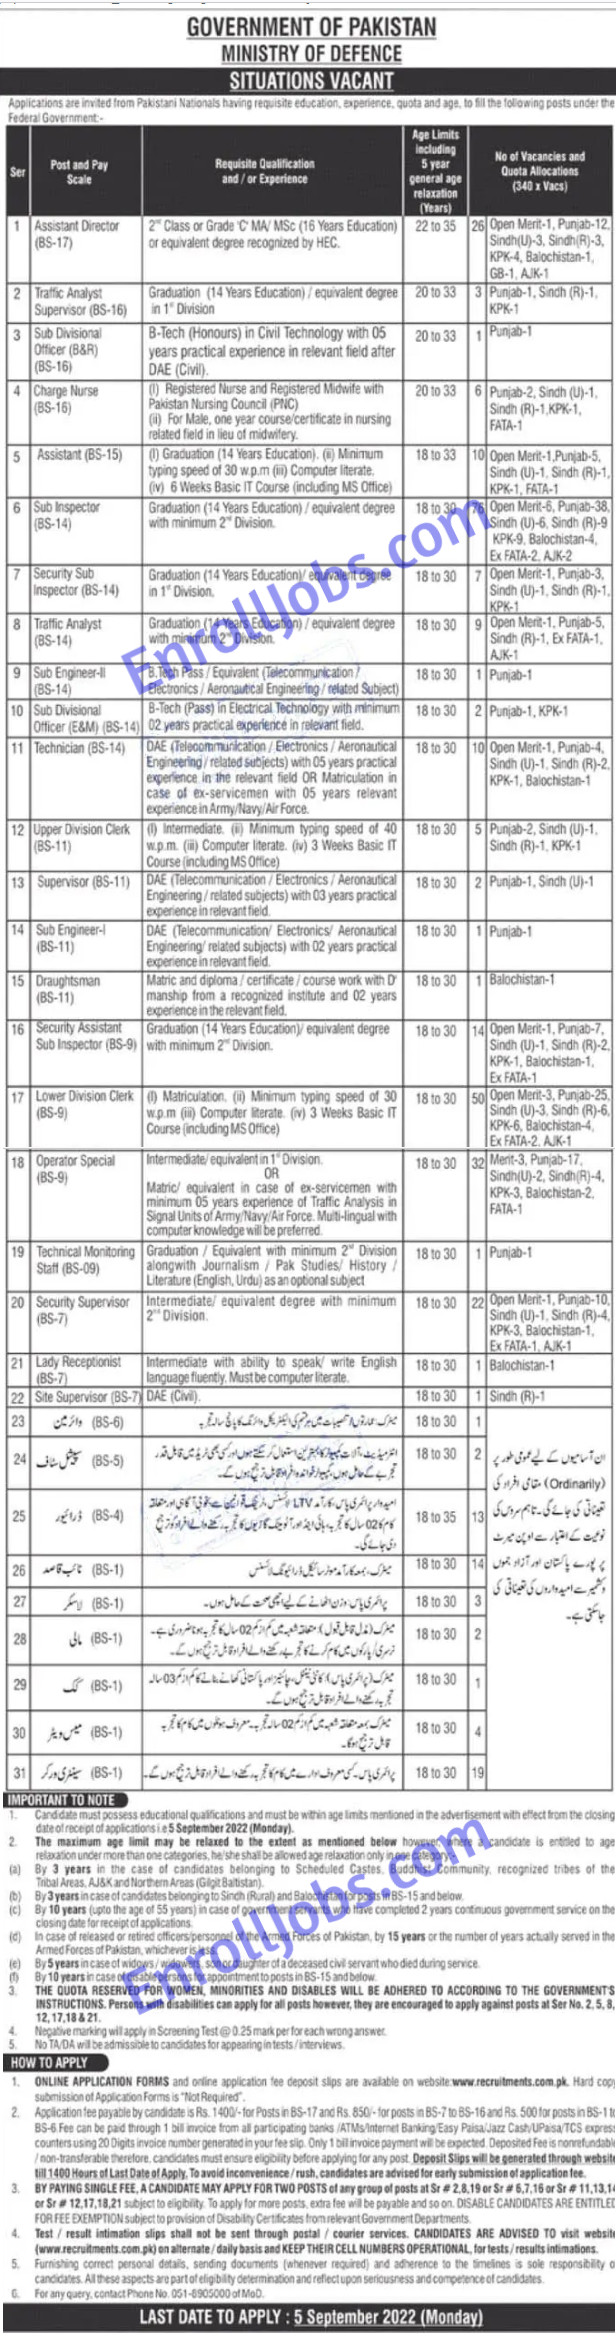 Enroll Jobs Ministry of Defense Pakistan - Latest Government Jobs 2022